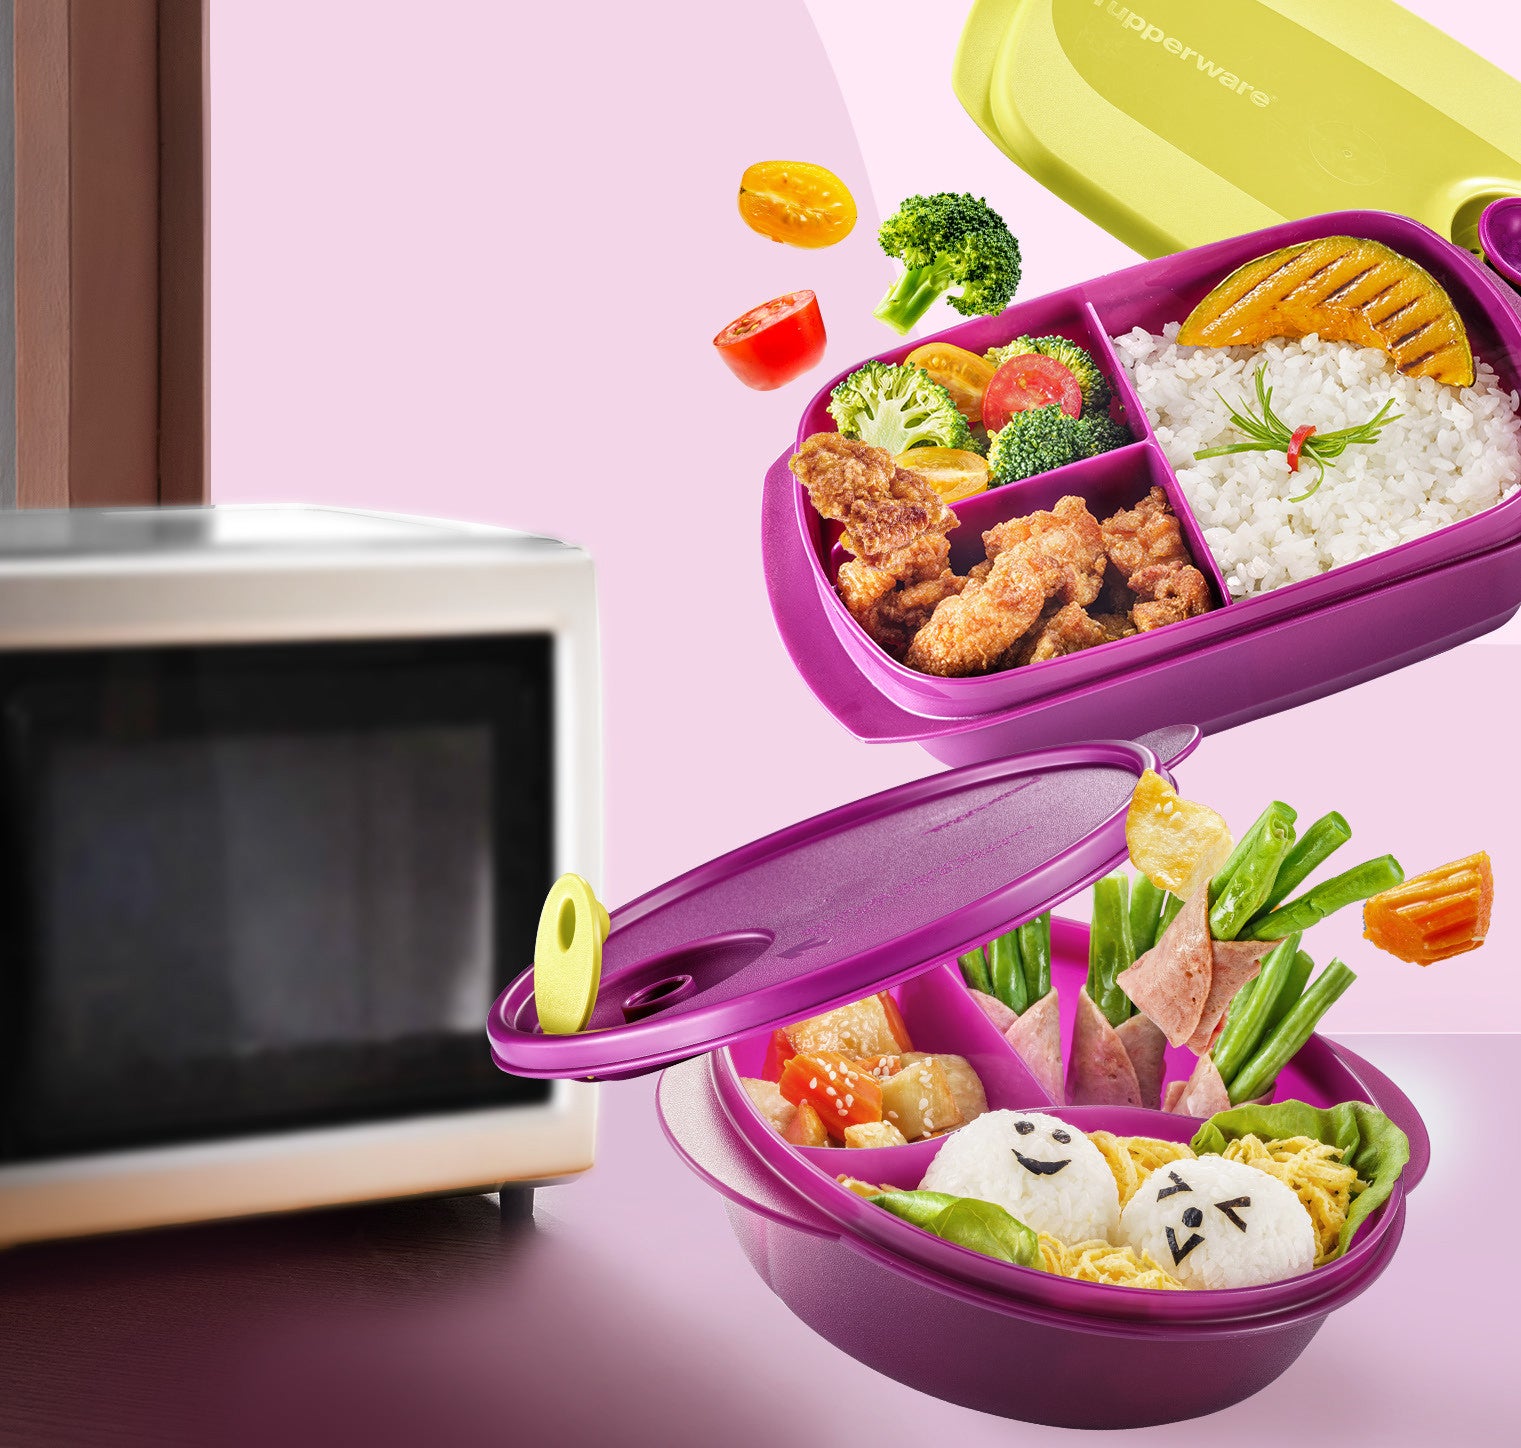 Tupperware Click To Go: Your Best Lunch Buddy  TupperBlog – eTuppStore  (PM) by Tupperware Brands Malaysia Sdn. Bhd. 199401001646 (287324-M)